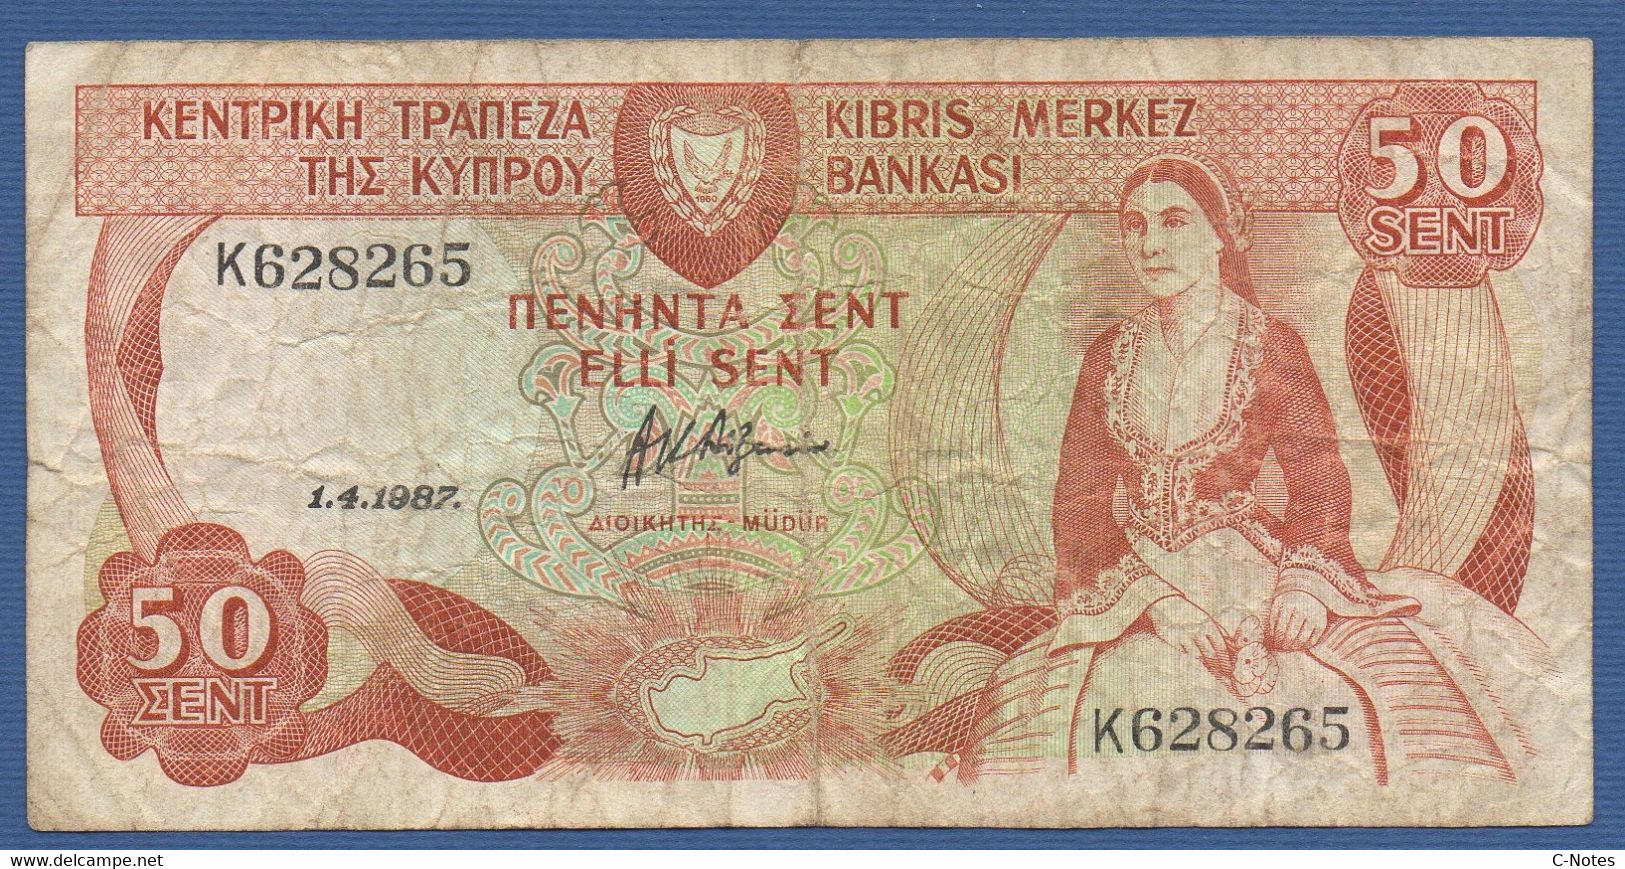 CYPRUS - P.52a – 50 Cents / Sent 01.04.1987 Circulated Serie K628265 - Zypern